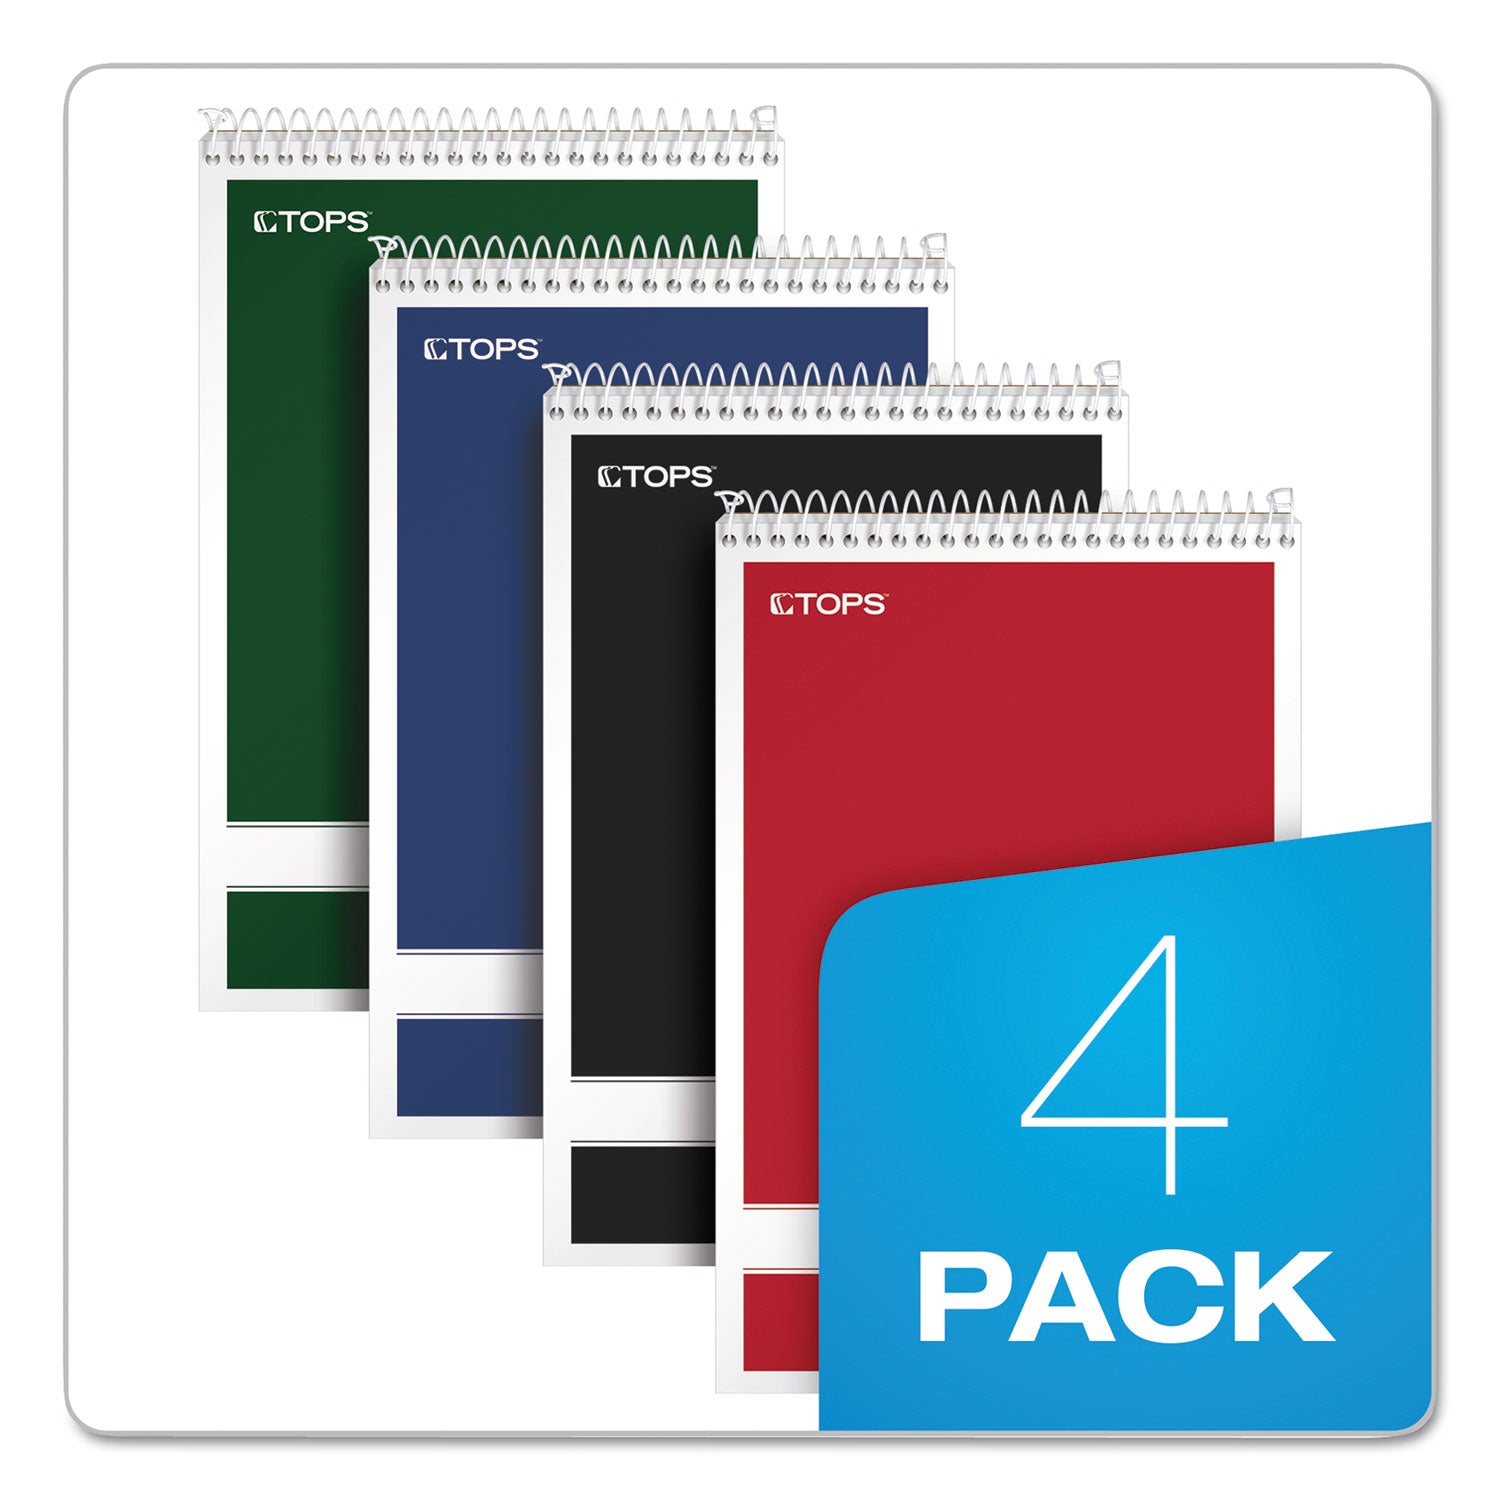 Steno Pad, Gregg Rule, Assorted Cover Colors, 80 Green-Tint 6 x 9 Sheets, 4/Pack - 